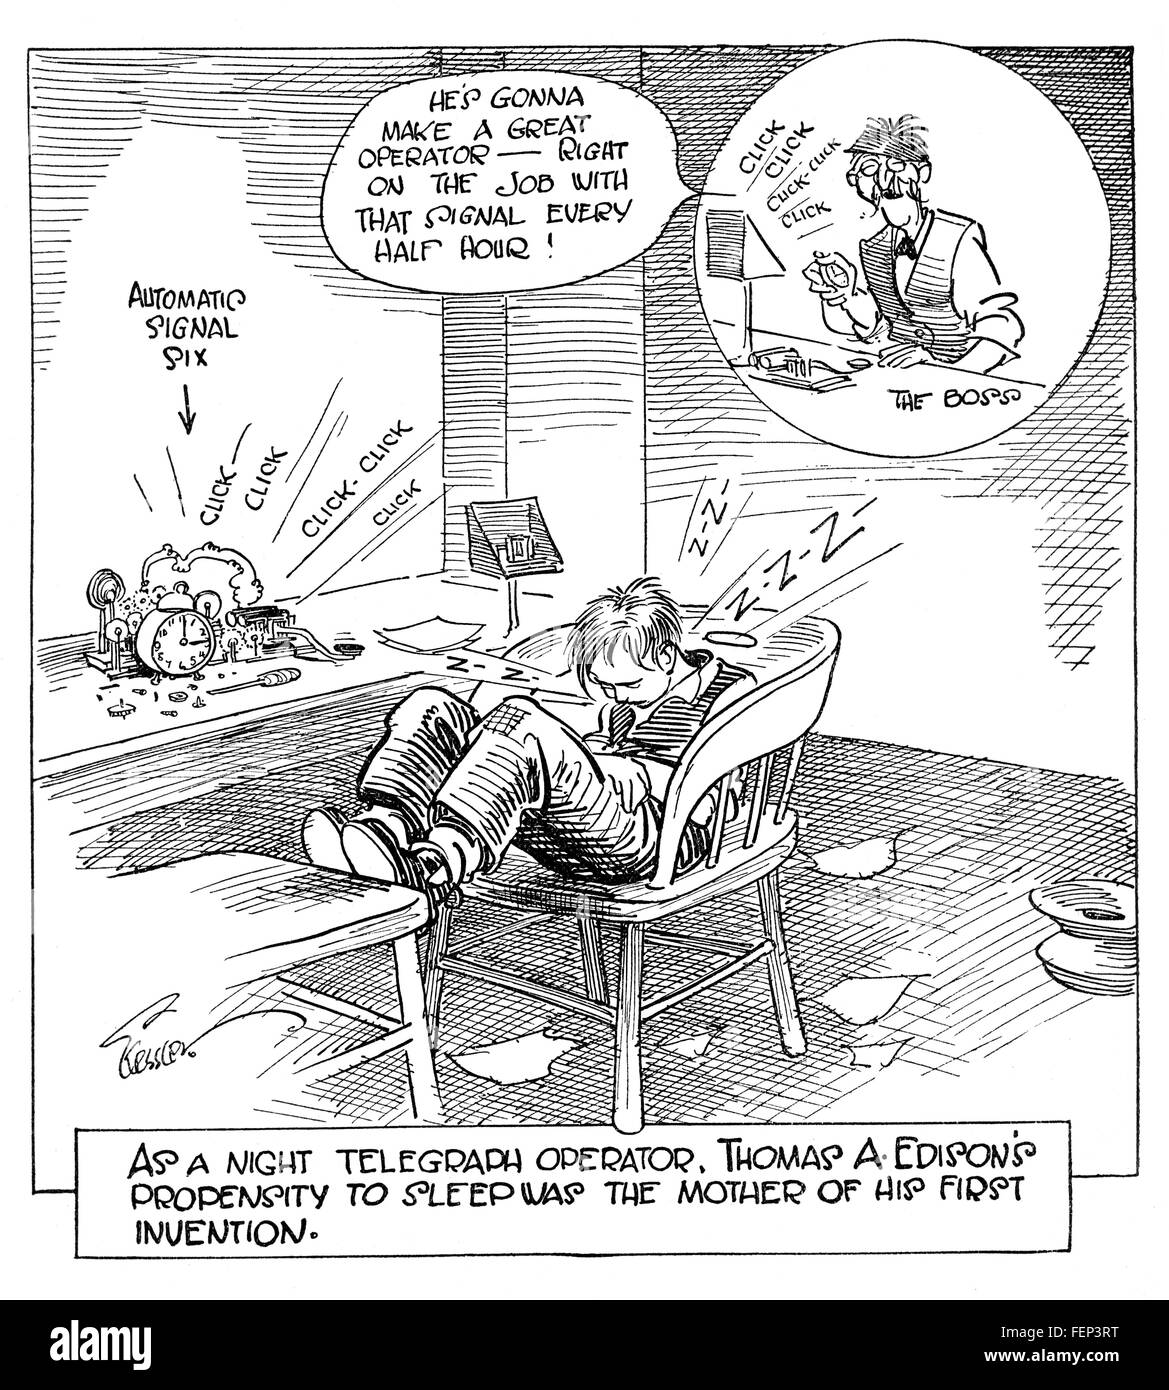 Cartoon showing young Thomas Edison sleeping while an alarm clock automatically activates telegraph key for half-hour signals Stock Photo